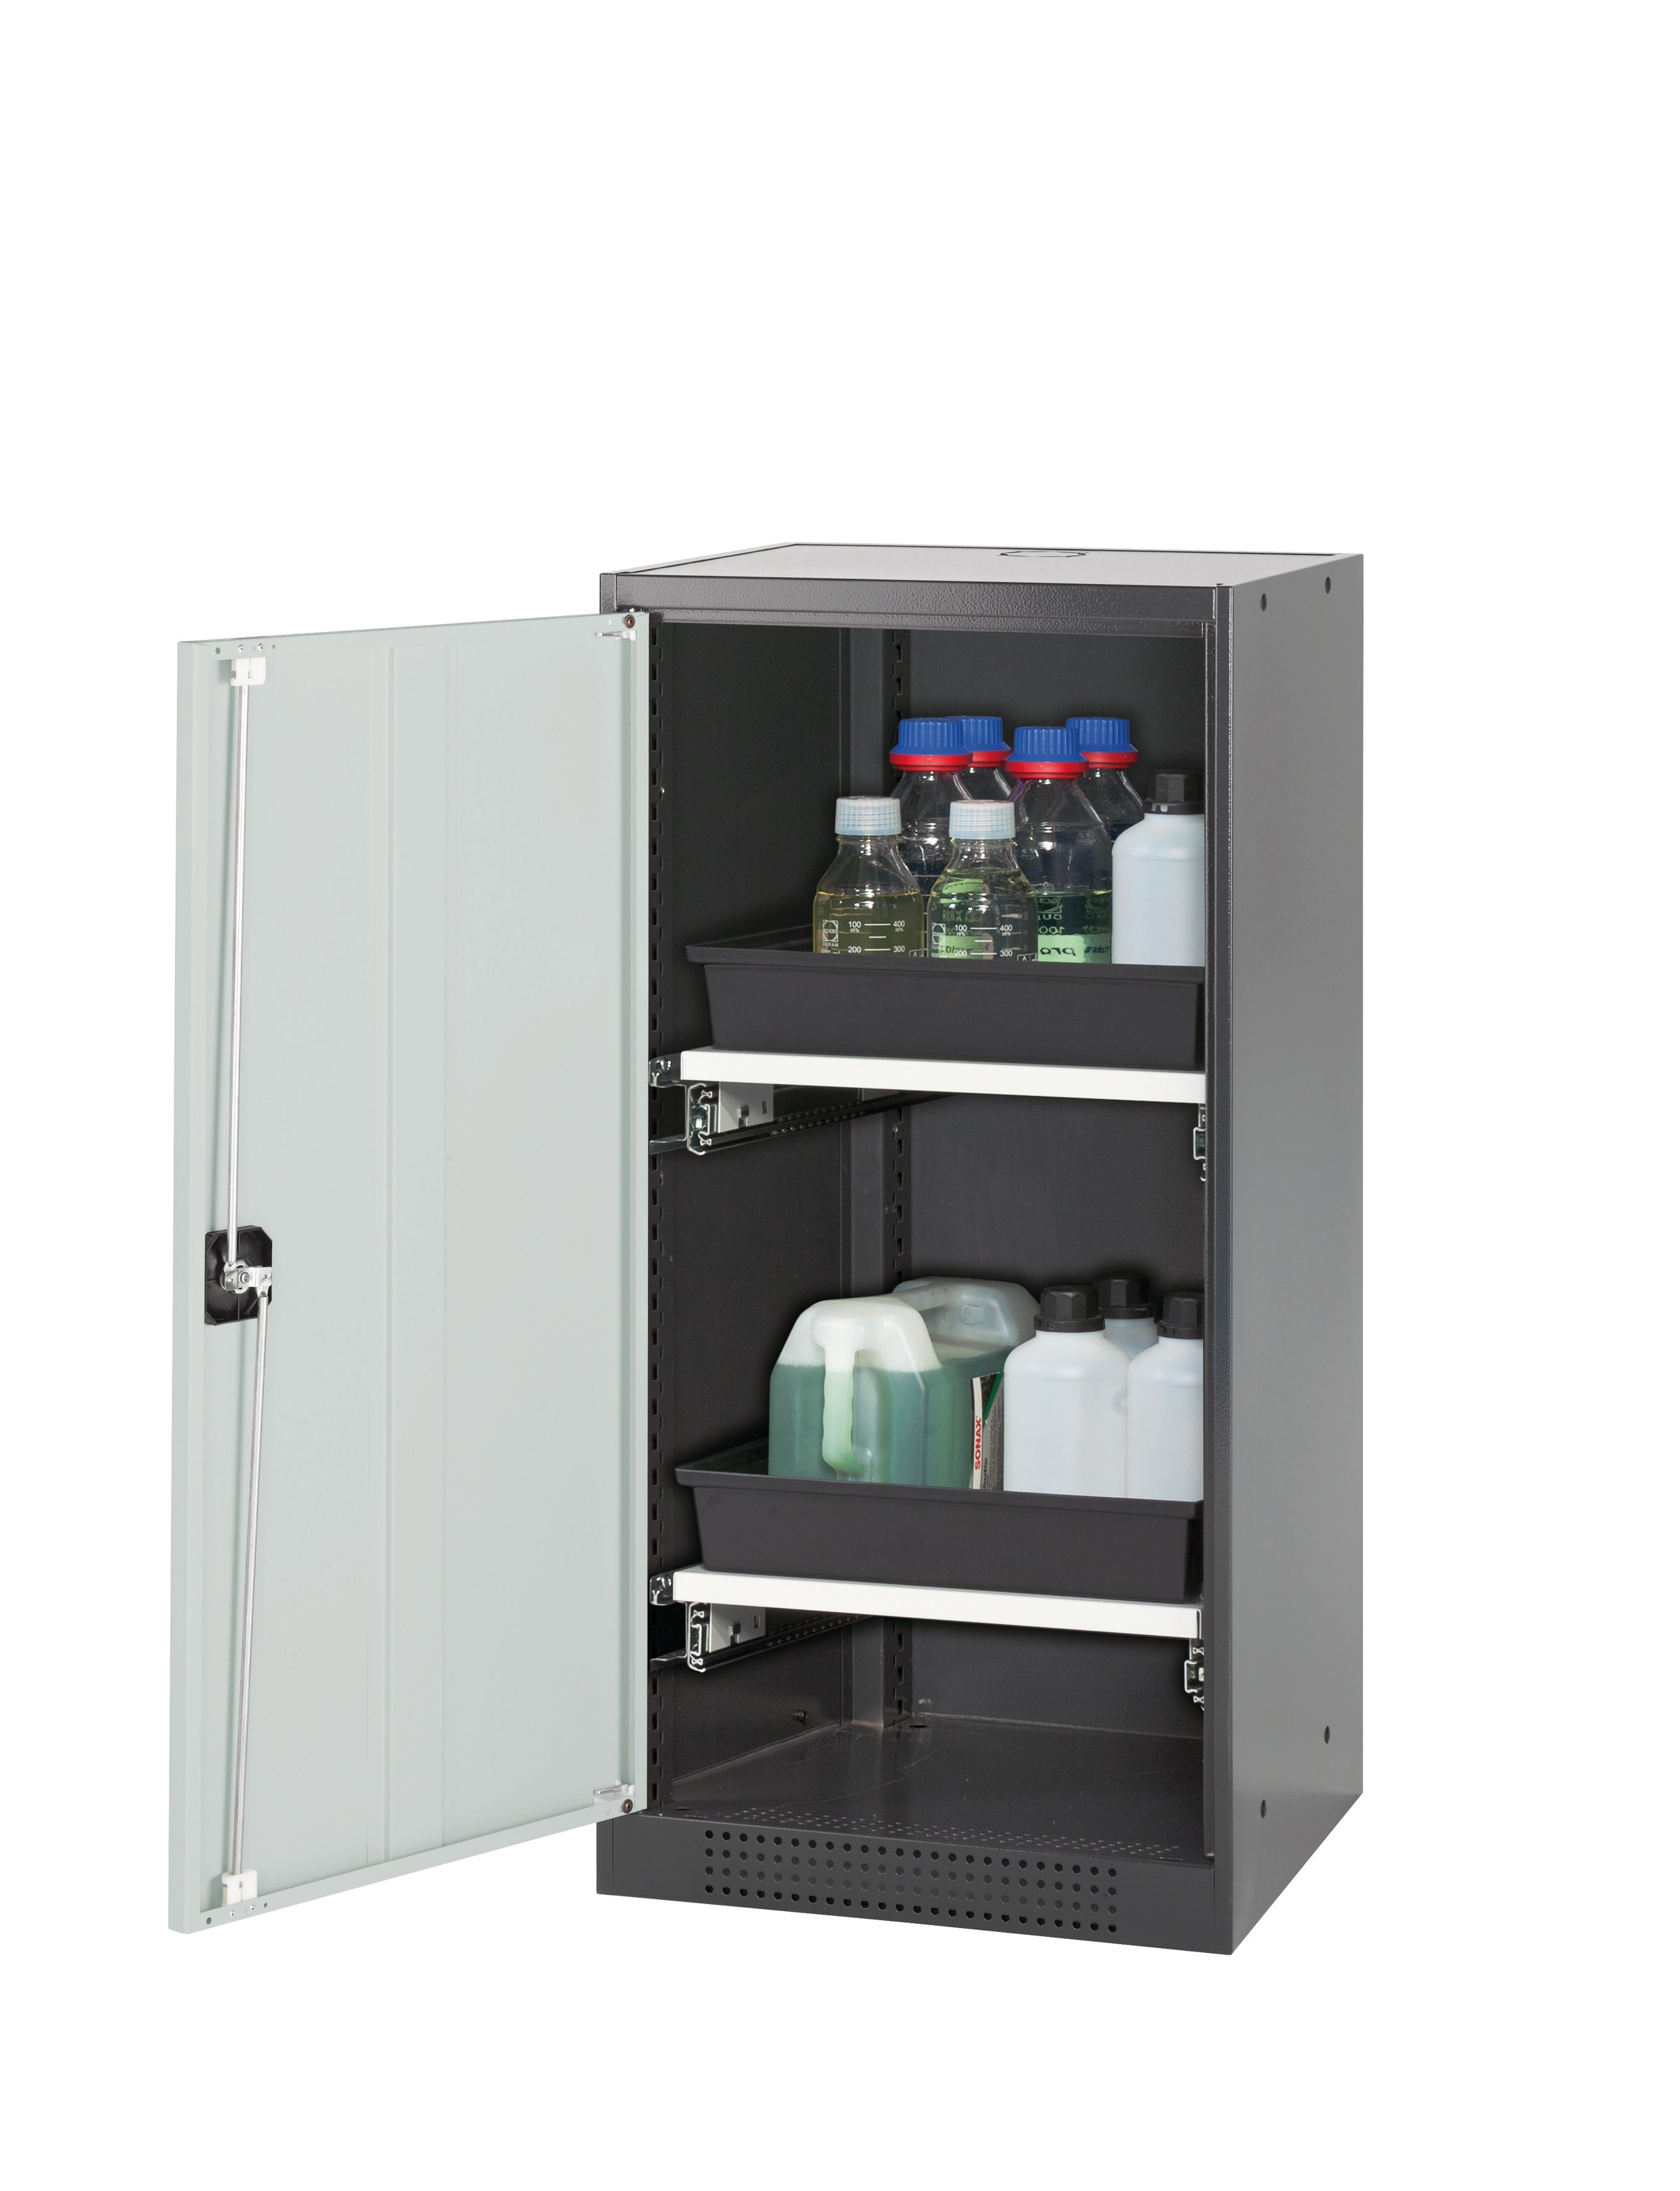 Chemical cabinet CS-CLASSIC model CS.110.054 in light gray RAL 7035 with 2x AbZ pull-out shelves (sheet steel/polypropylene)